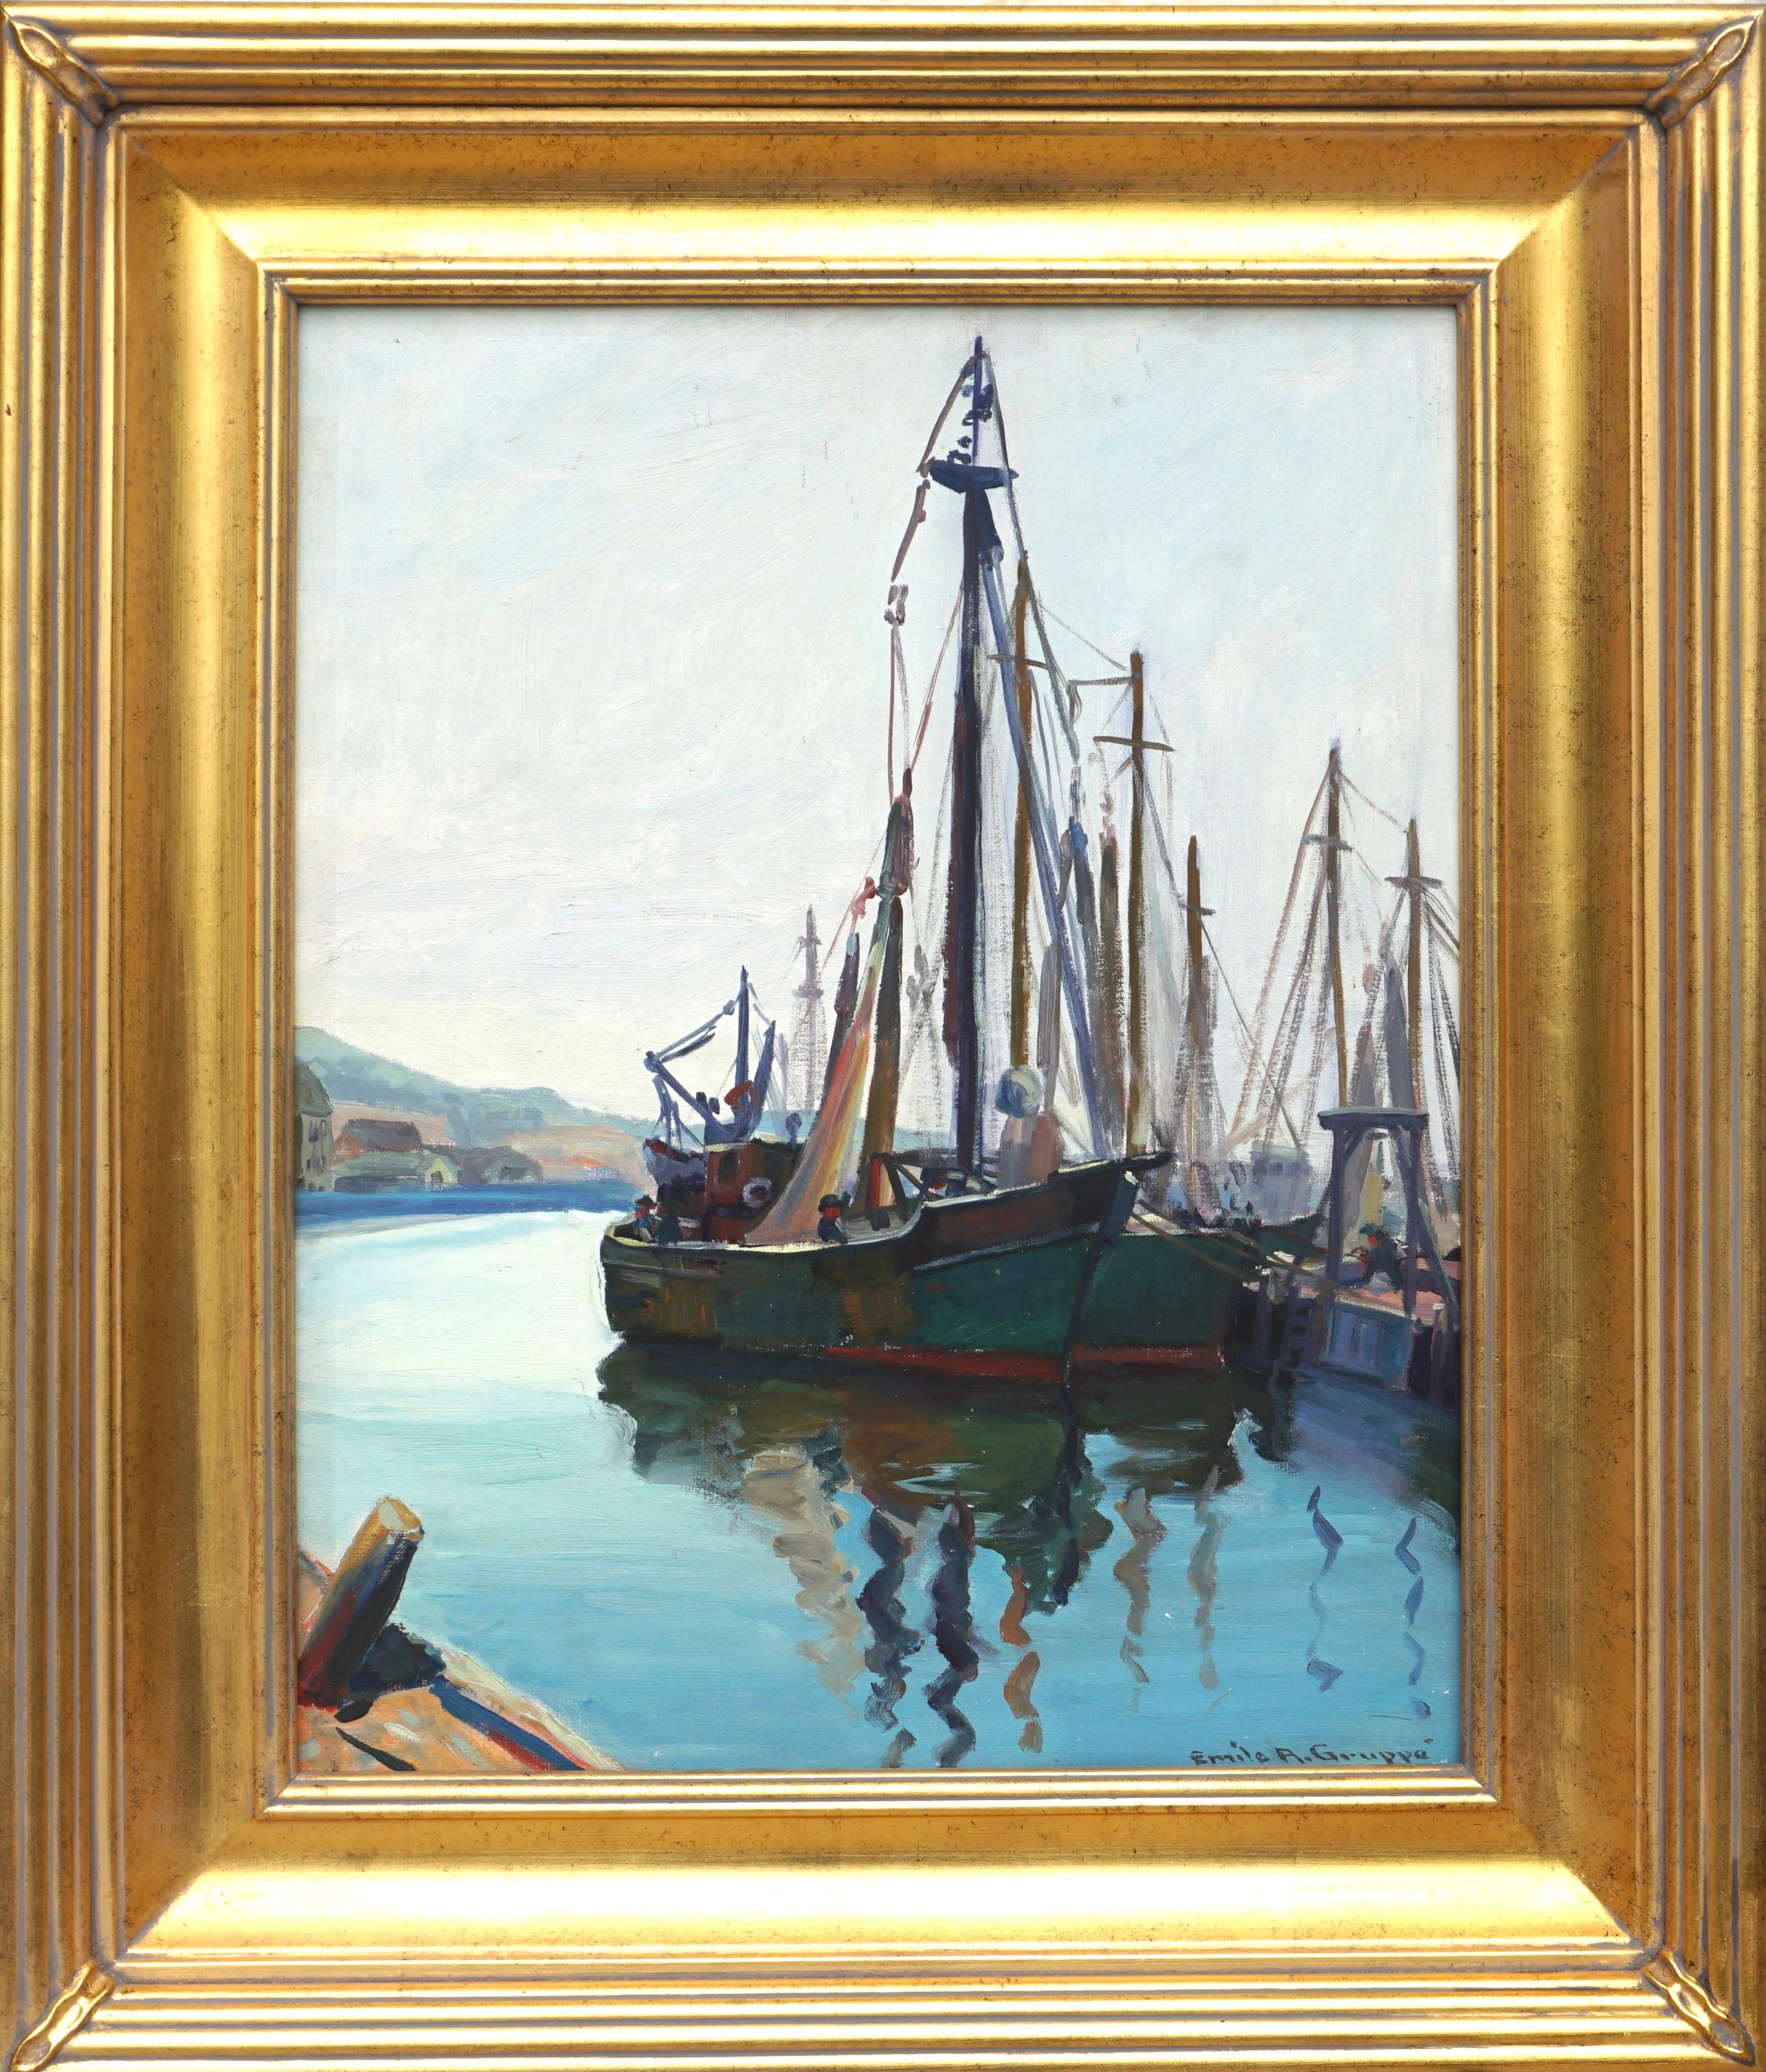 Emile Albert Gruppe (1896 - 1978) Fishing Boats Gloucester 
Oil / Canvasboard, Untitled Circa 1955
Signed: Emile A Gruppe, LR
Measures: 20 x 16 inches
Framed: 27 x 23 Inches

Condition: Excellent with new gilt frame

AVANTIQUES is dedicated to